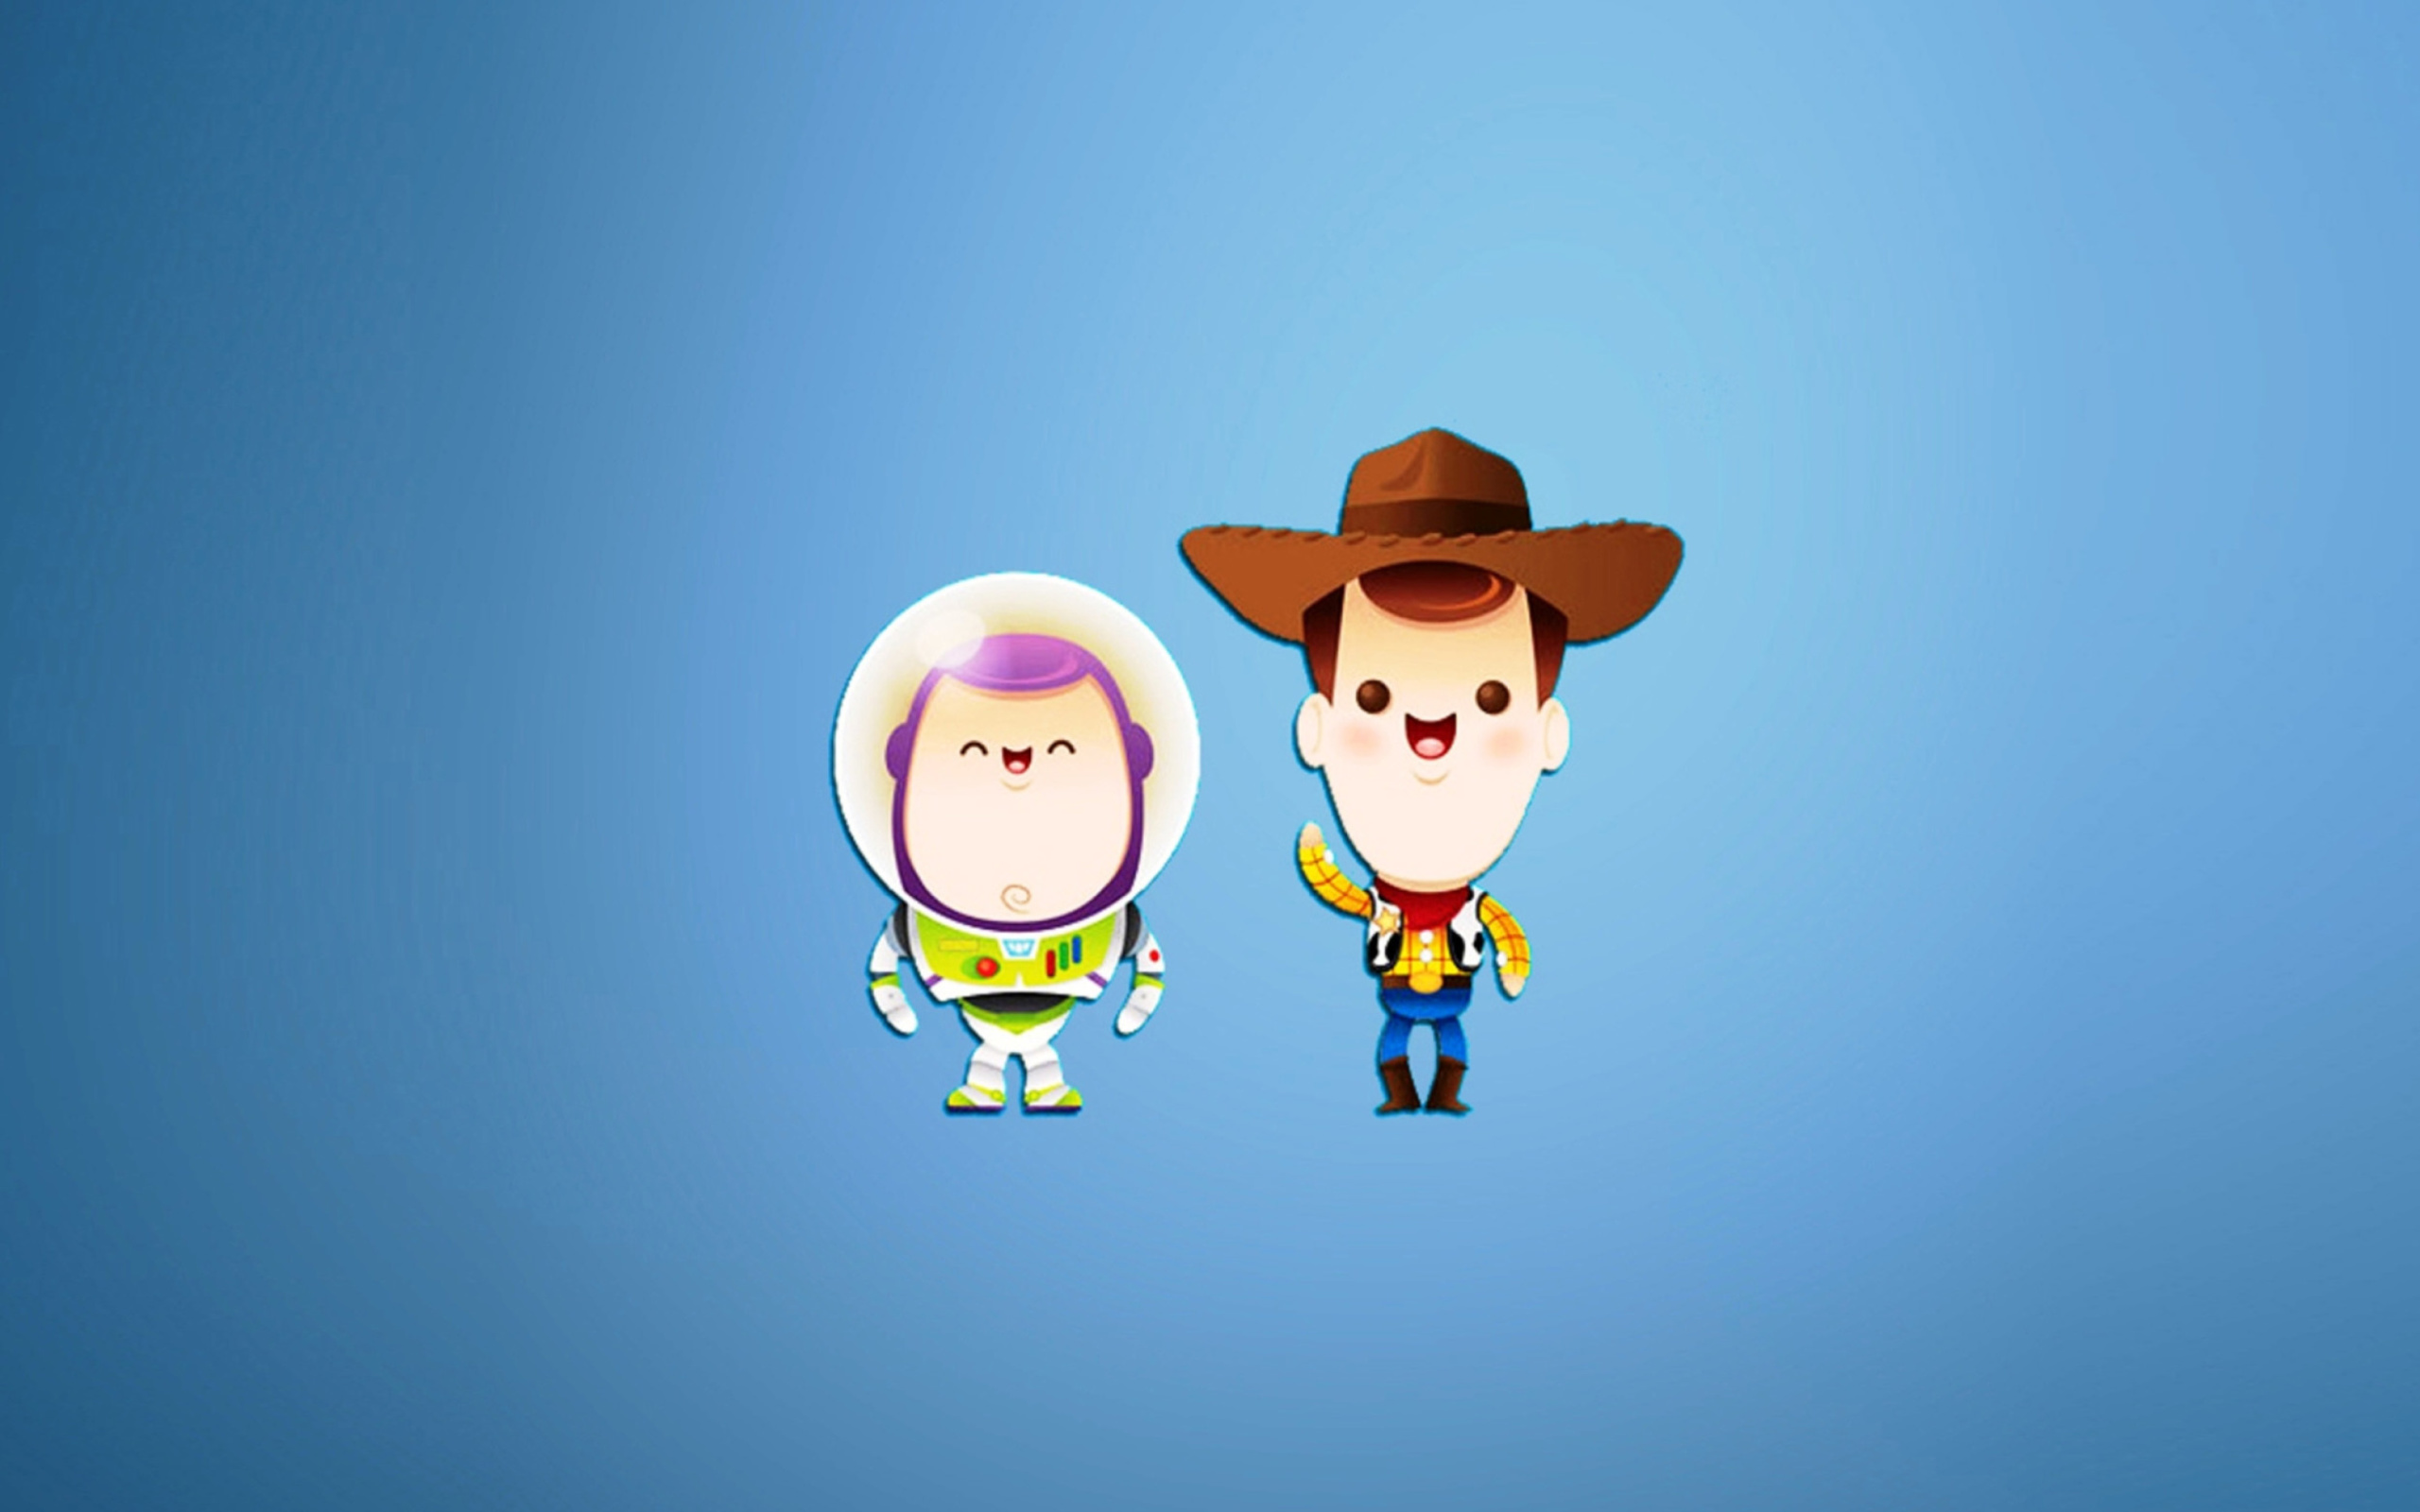 Das Buzz and Woody in Toy Story Wallpaper 2560x1600